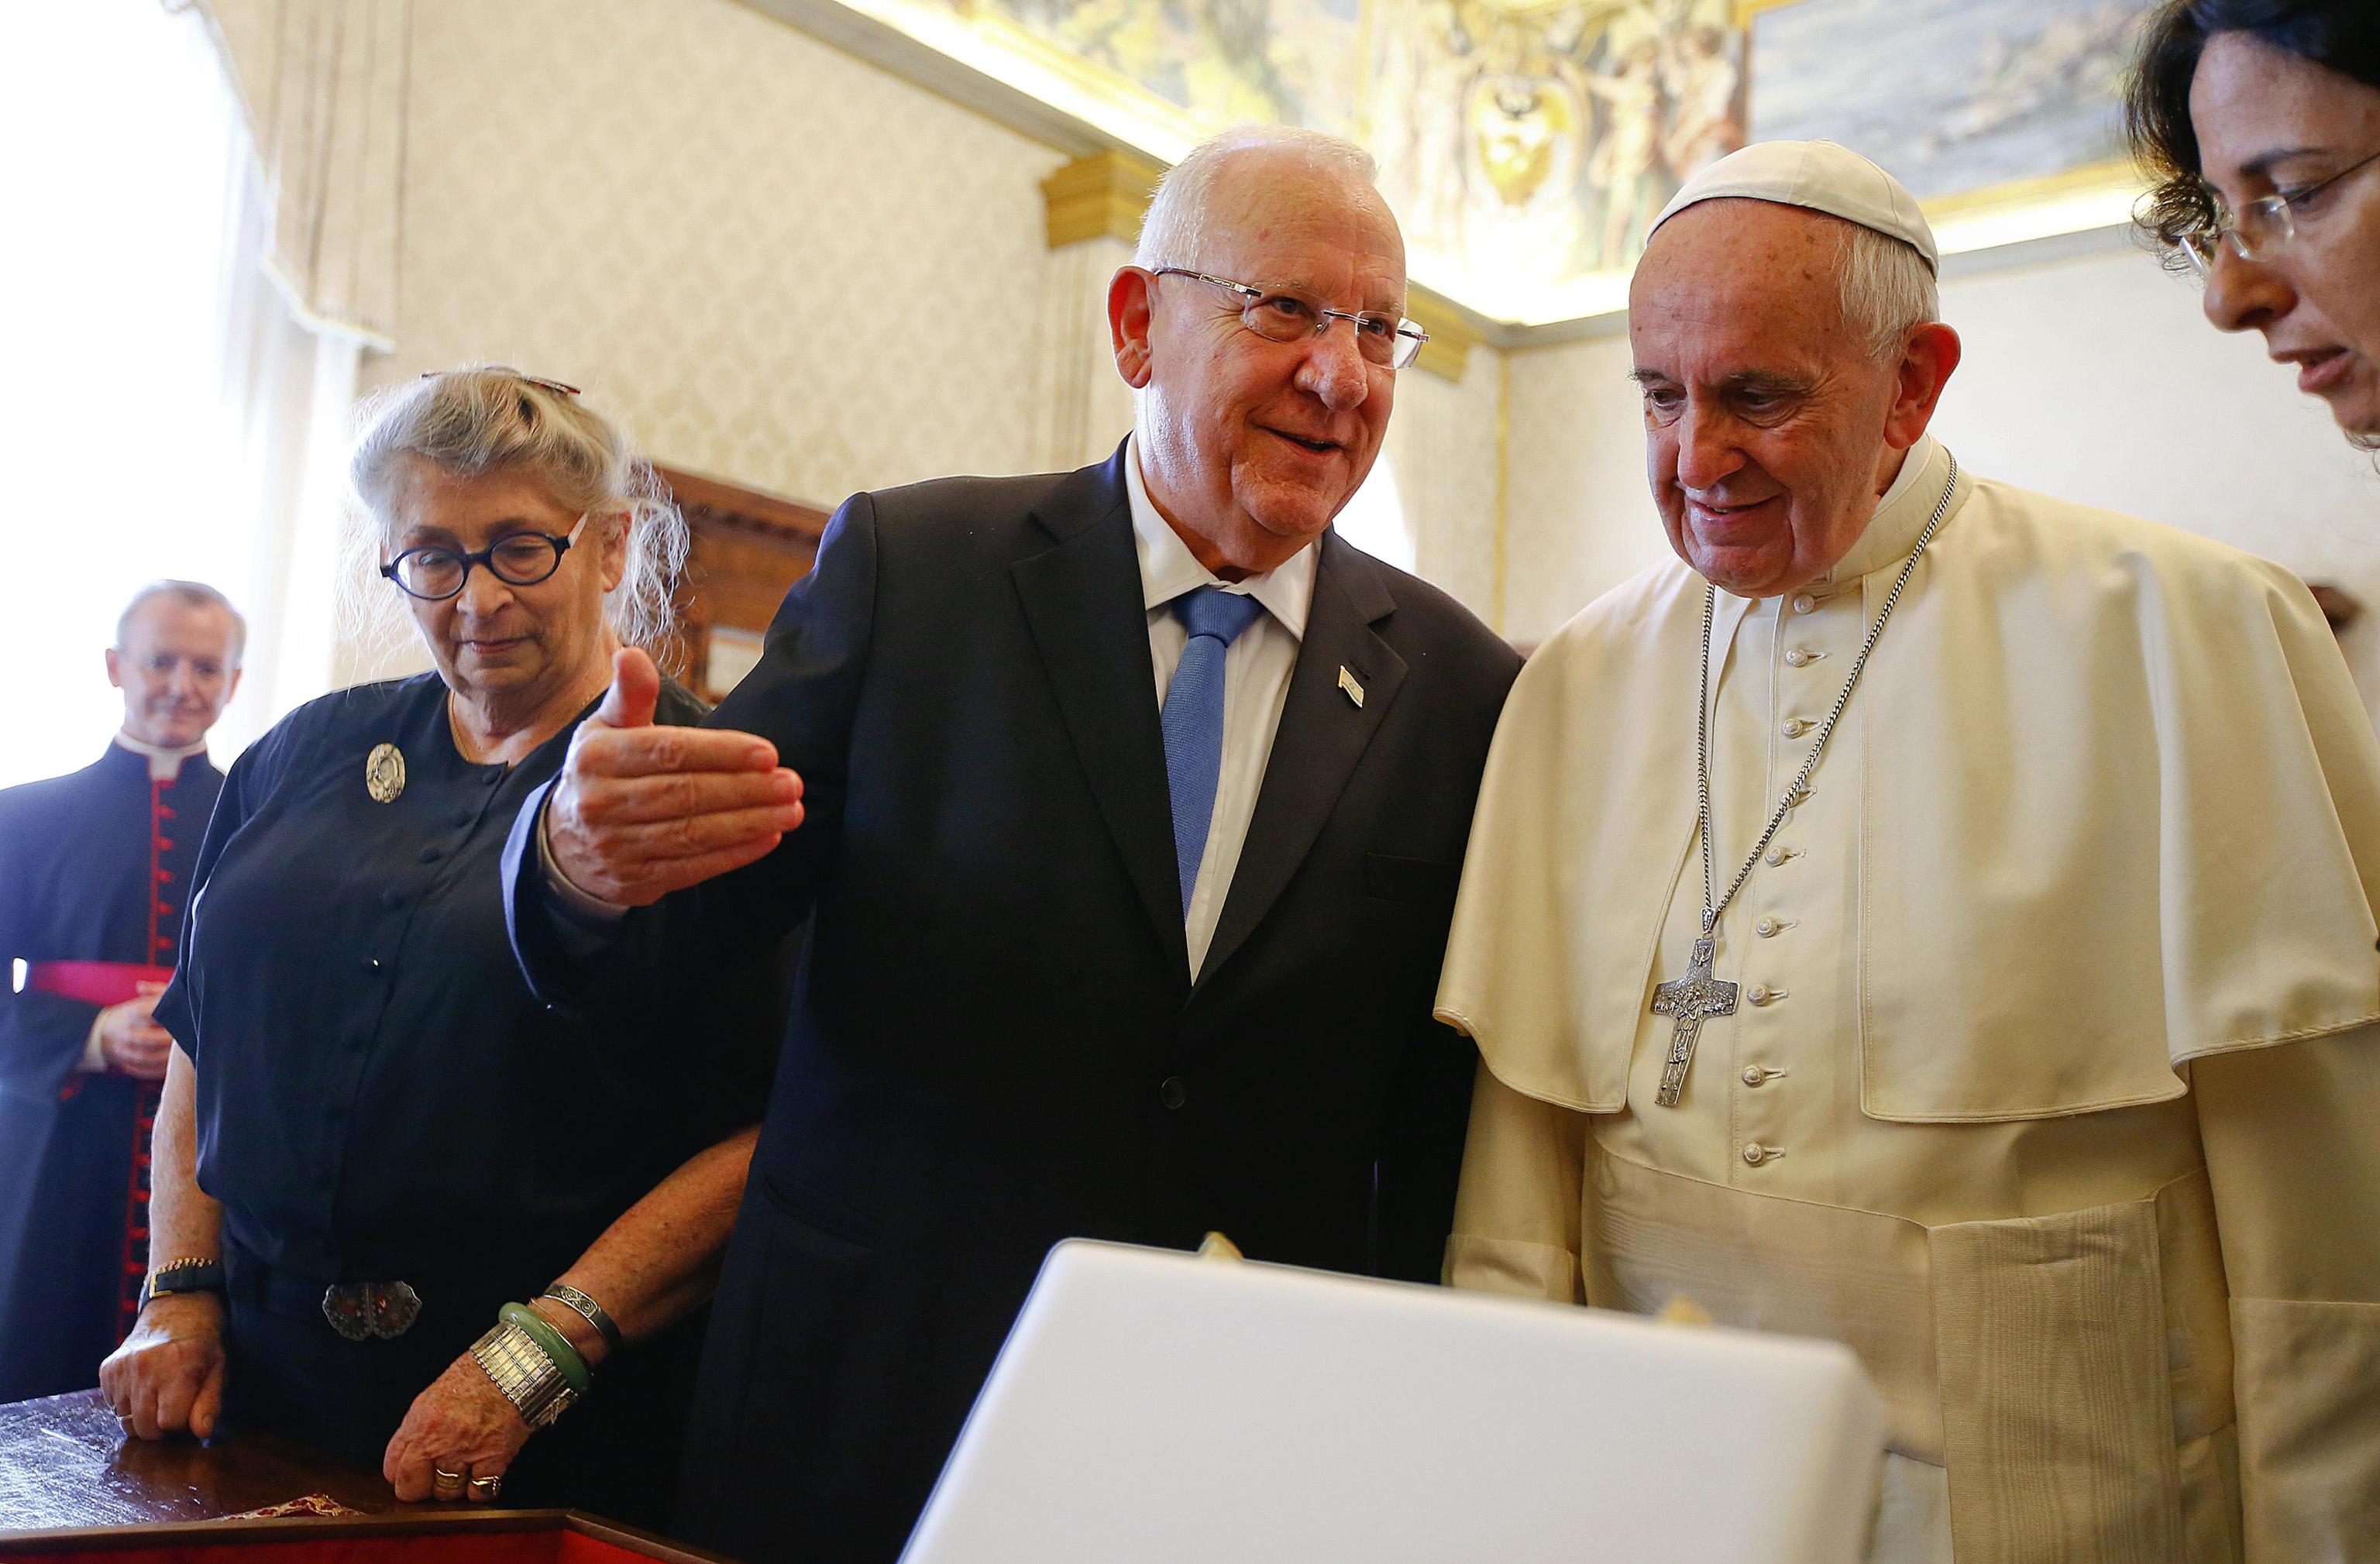 Pope Francis listens to Israel's President Reuven Rivlin as they exchange gifts during a private audience in the Pontiff's private library at the Vatican